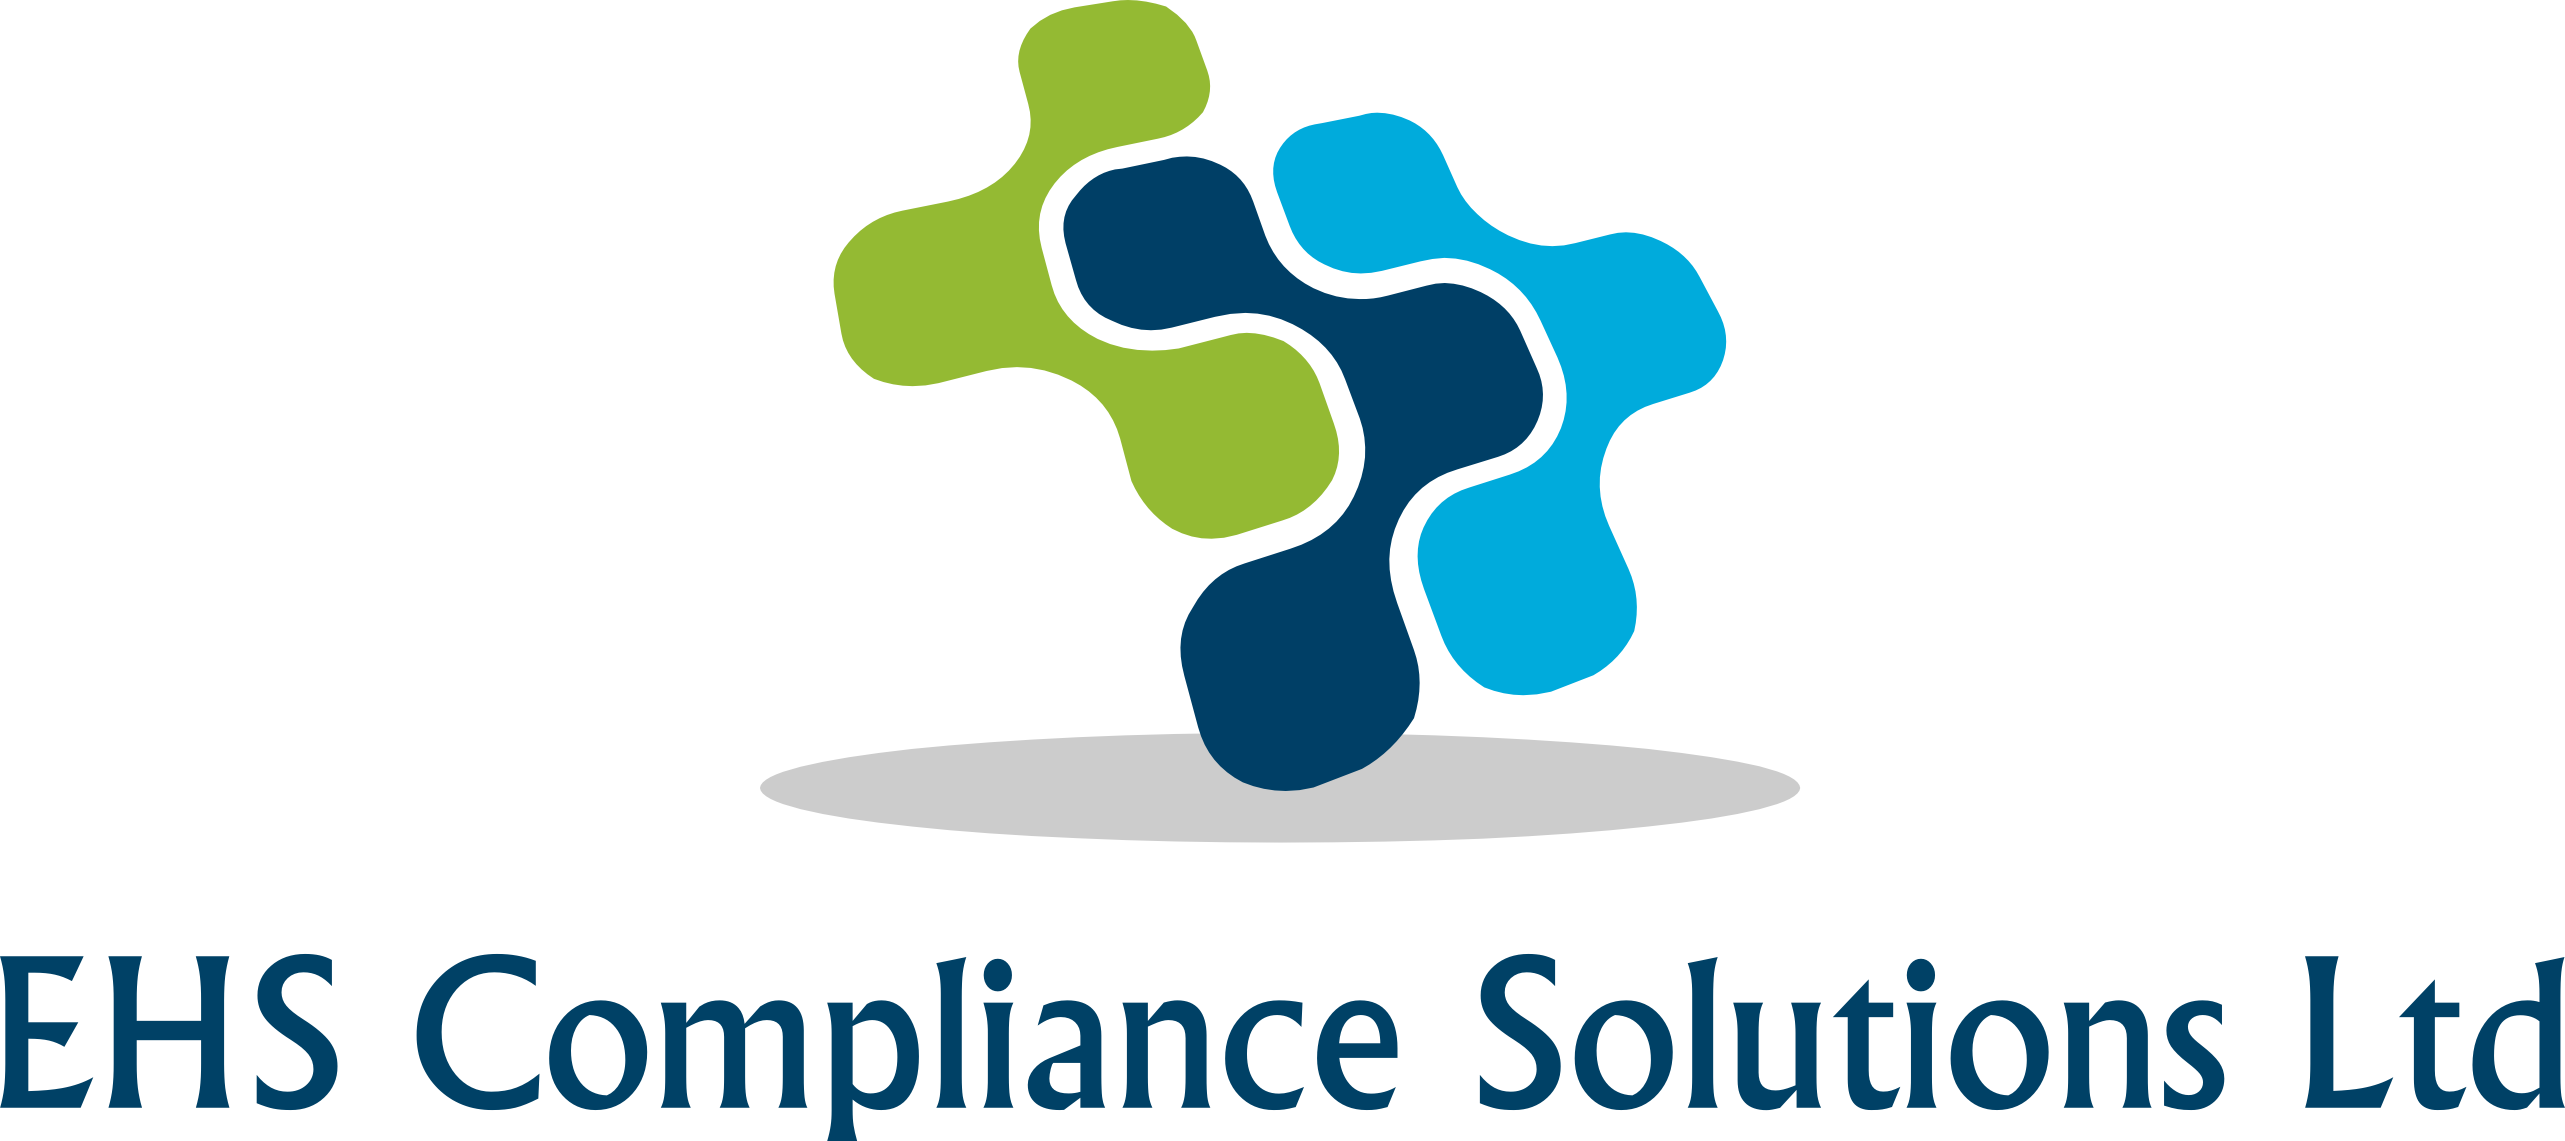 EHS Compliance Solutions Ltd, registered in England, Company Number: 10675793. Registered Address: Twin Oaks, West View Road, Headley Down, Bordon, Hampshire, GU35 8JS.